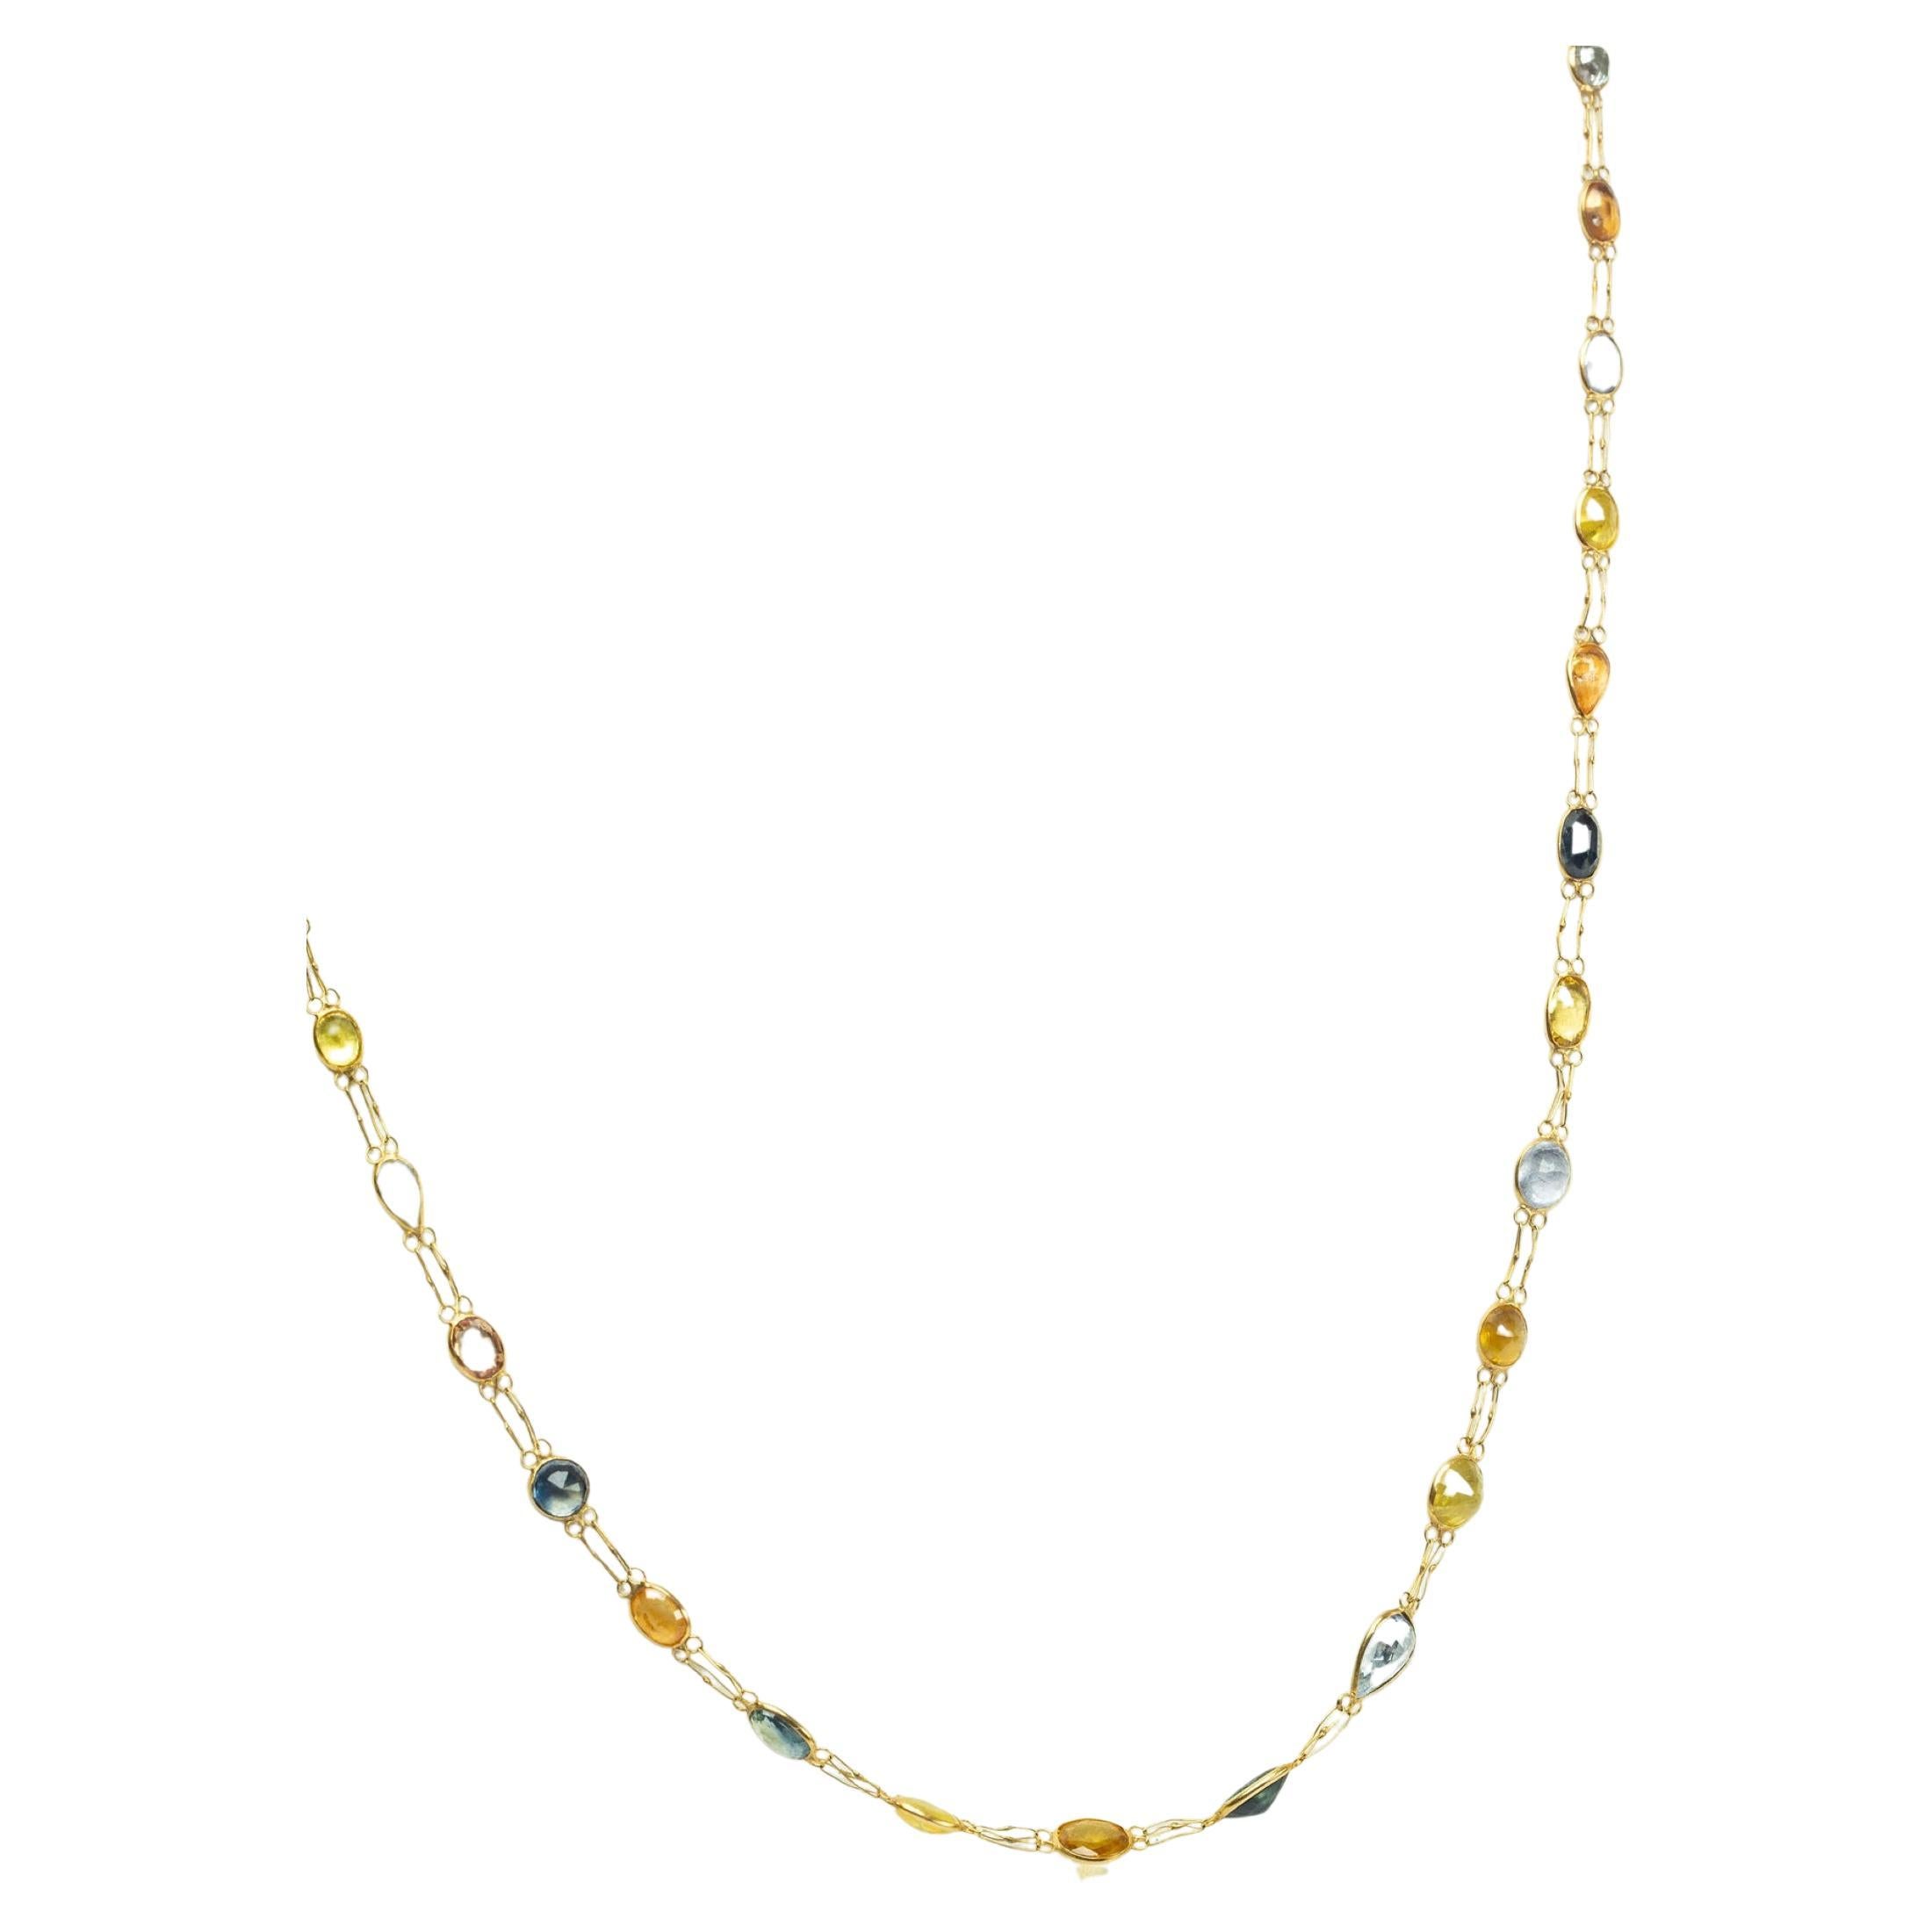 13ctw Multicolor Sapphire and Emerald 18k Gold Link Necklace